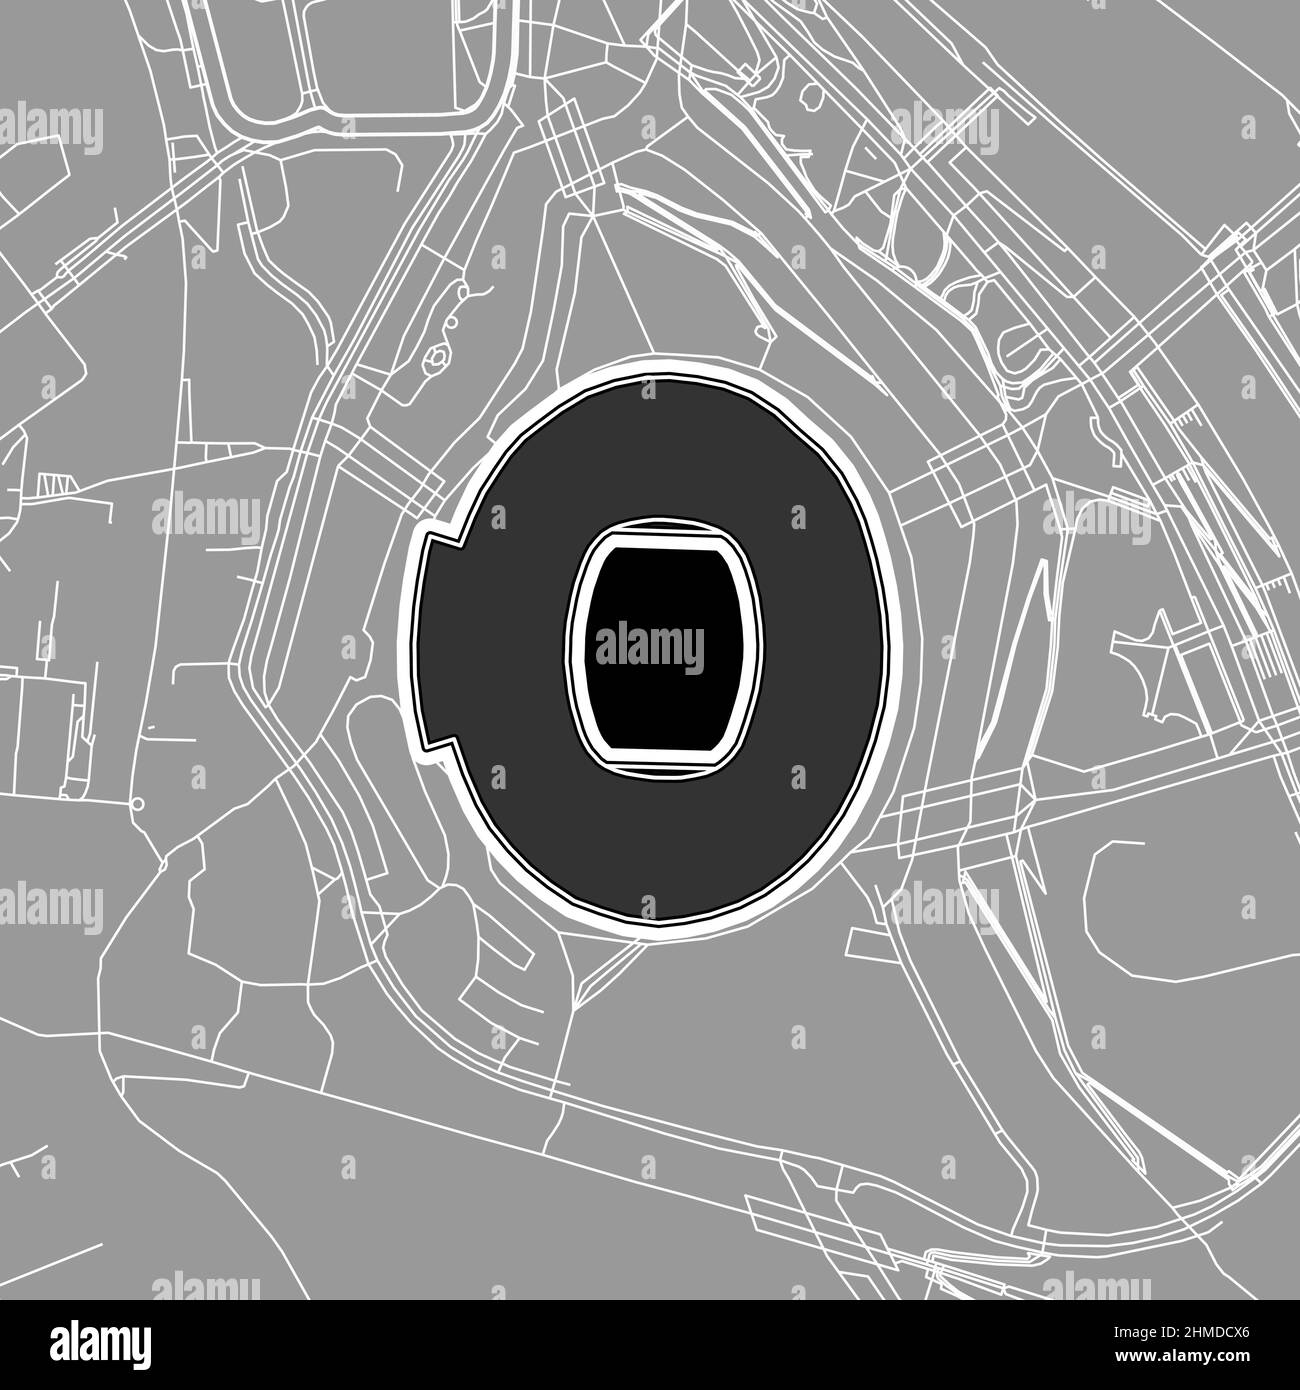 London, Baseball MLB Stadium, outline vector map. The baseball statium map was drawn with white areas and lines for main roads, side roads. Stock Vector